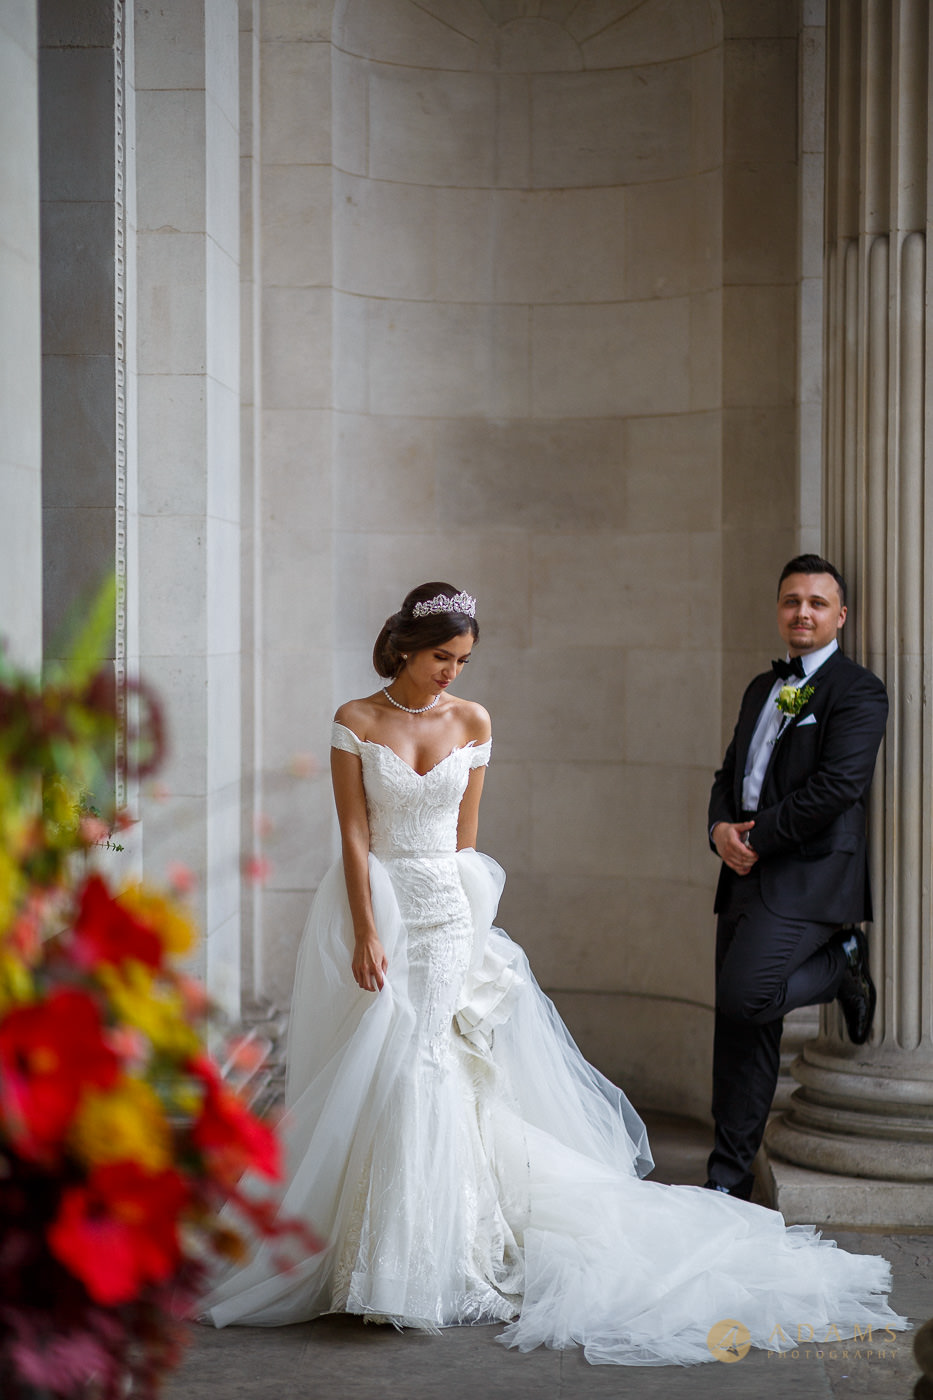 Old-Marylebone Town Hall Wedding Photographer couple posing outside the registry office